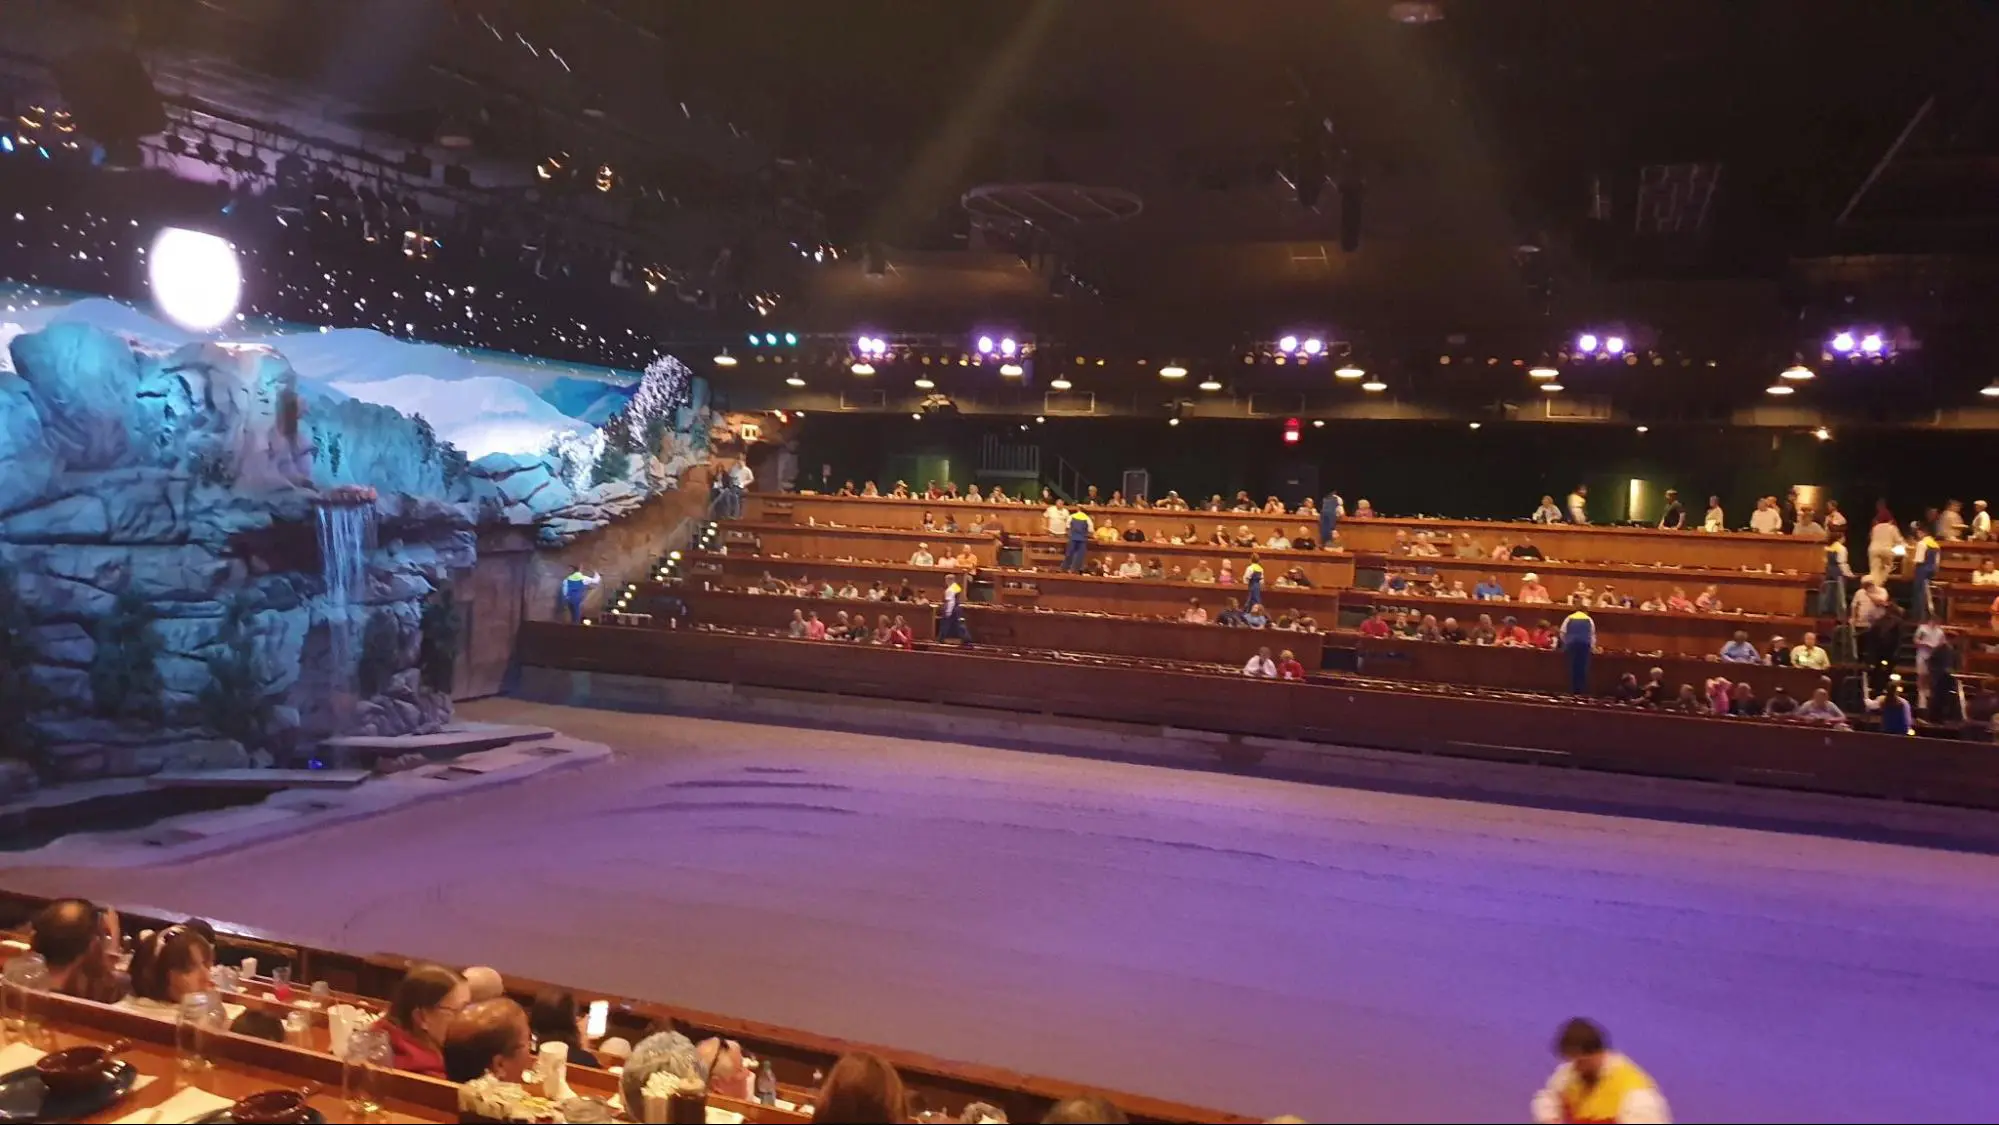 A Rootin Tootin Review Of Dolly Parton S Dixie Stampede In Pigeon Forge Sara Journeys